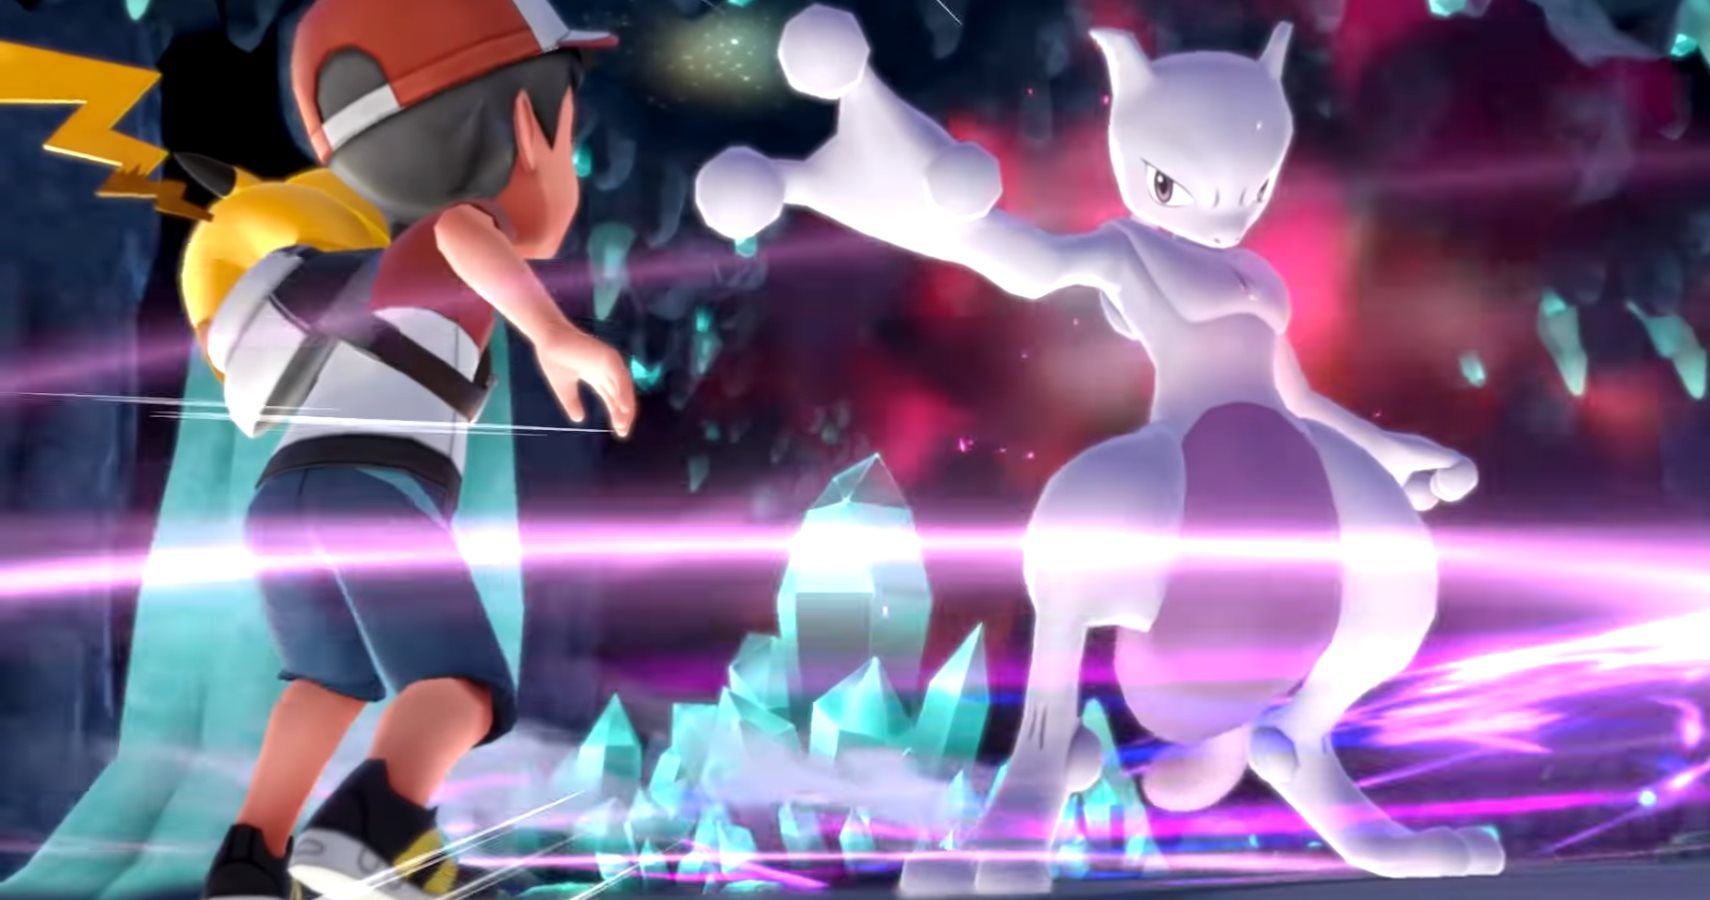 Pokémon Lets Go Pikachu And Eevee Sell Three Million In First Week  The Best For Any Switch Game Yet